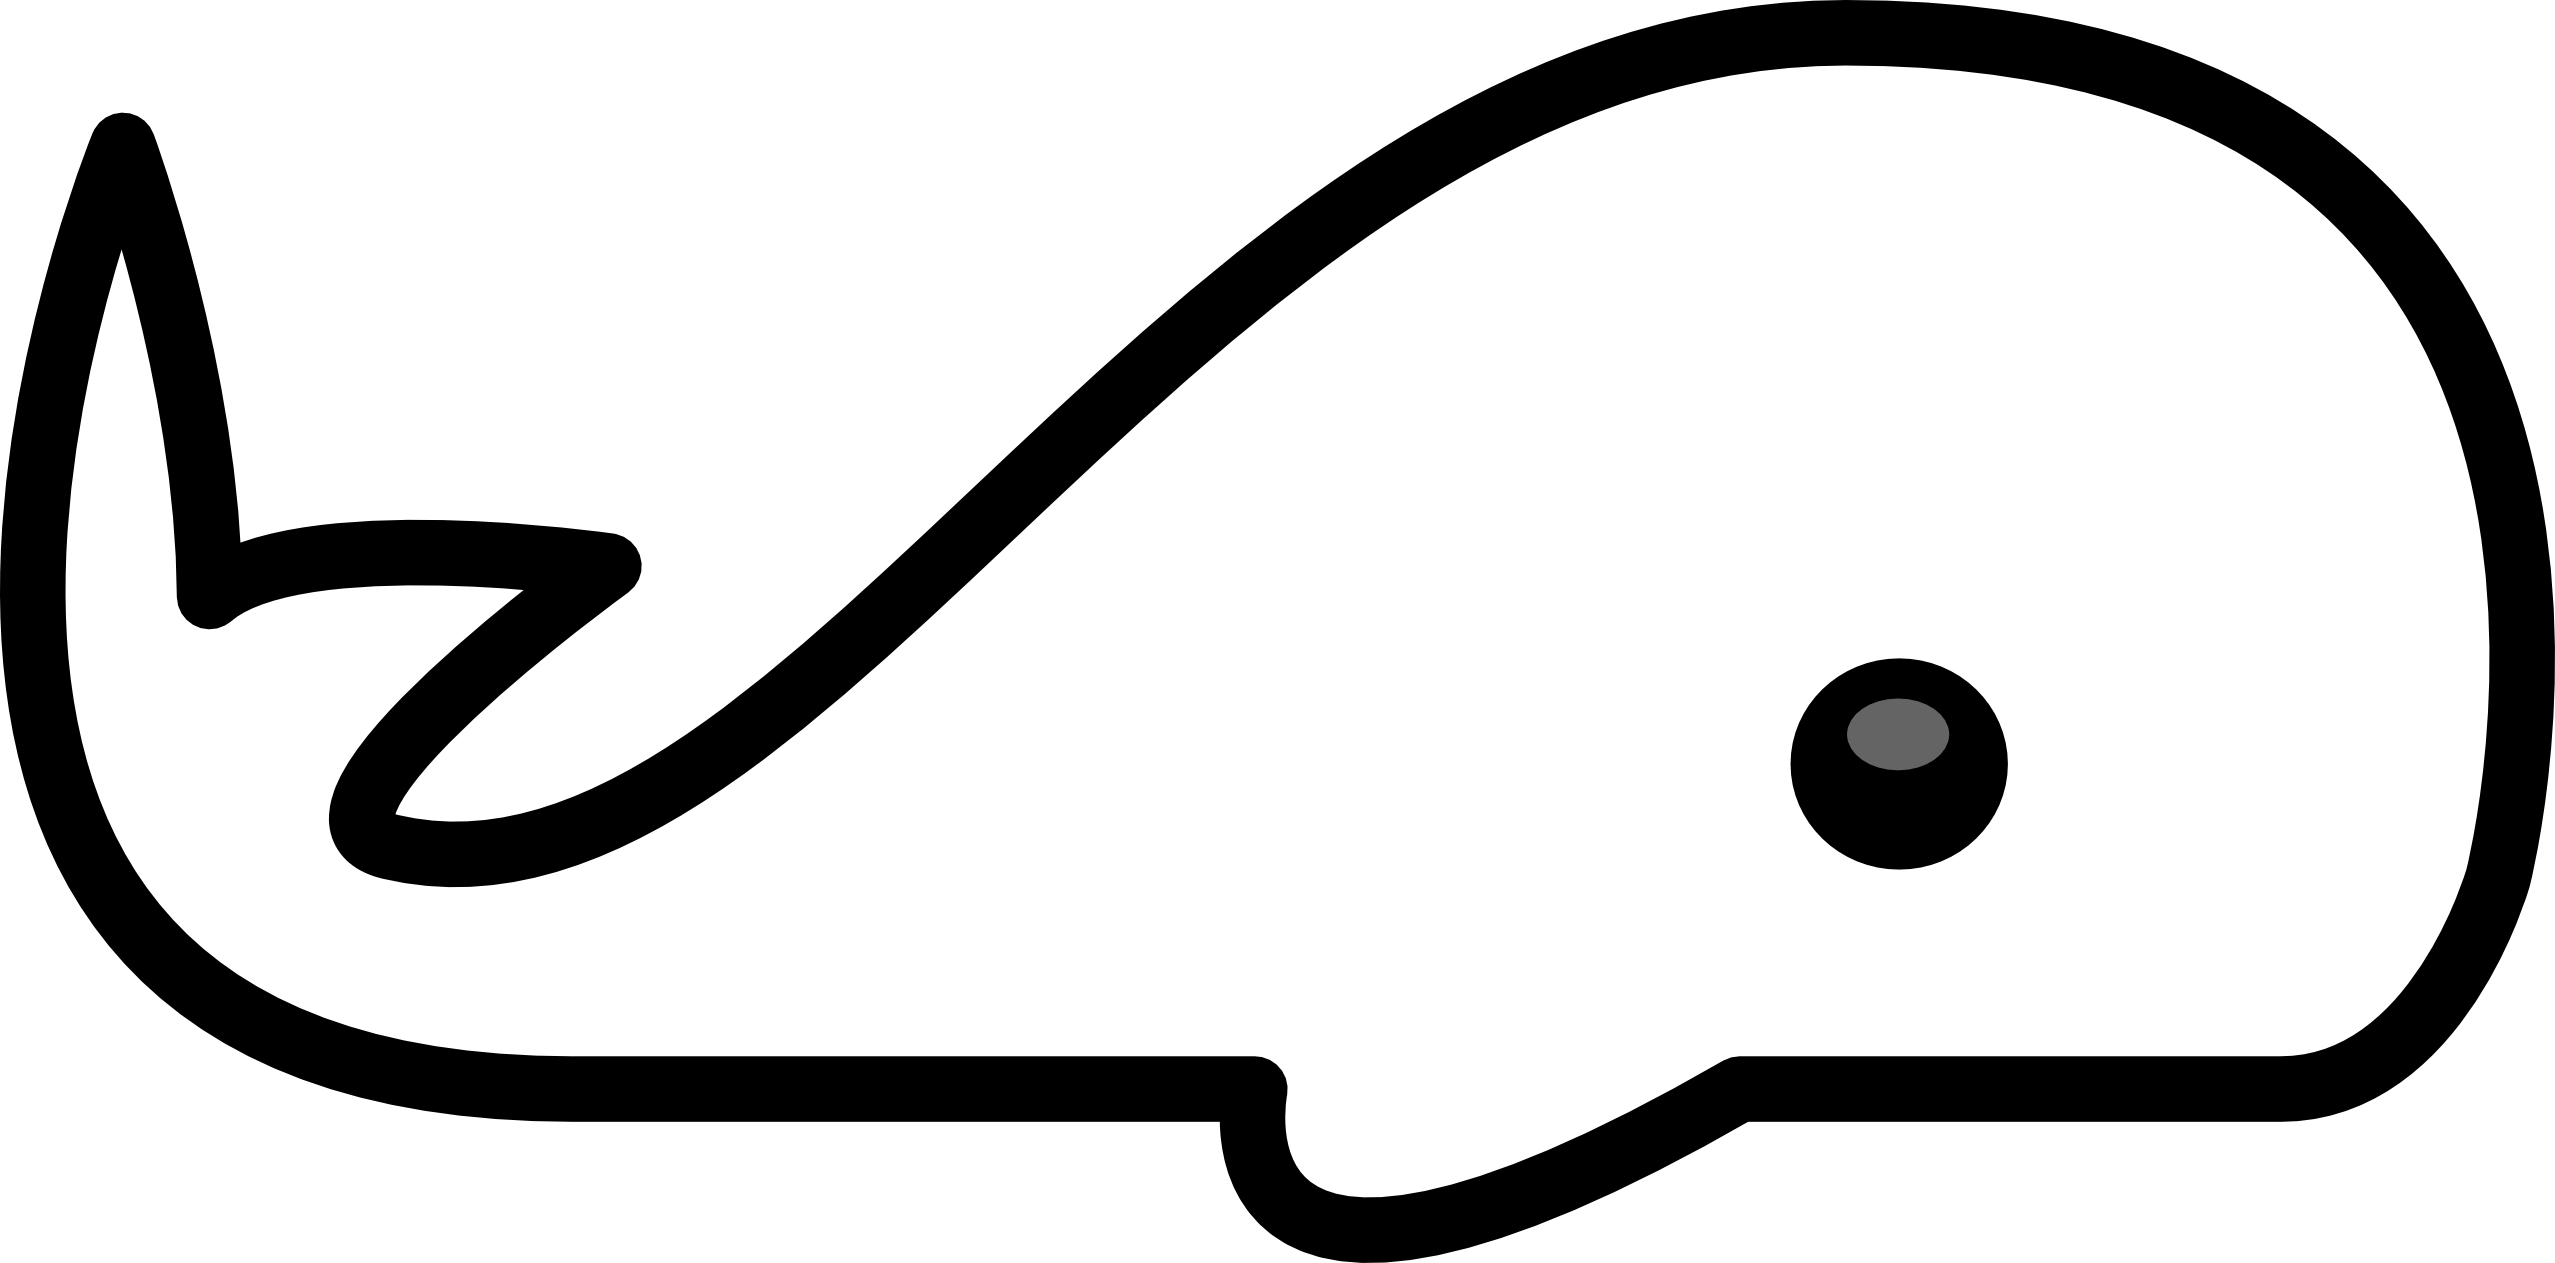 Whale Clip Art Black And White   Clipart Panda   Free Clipart Images